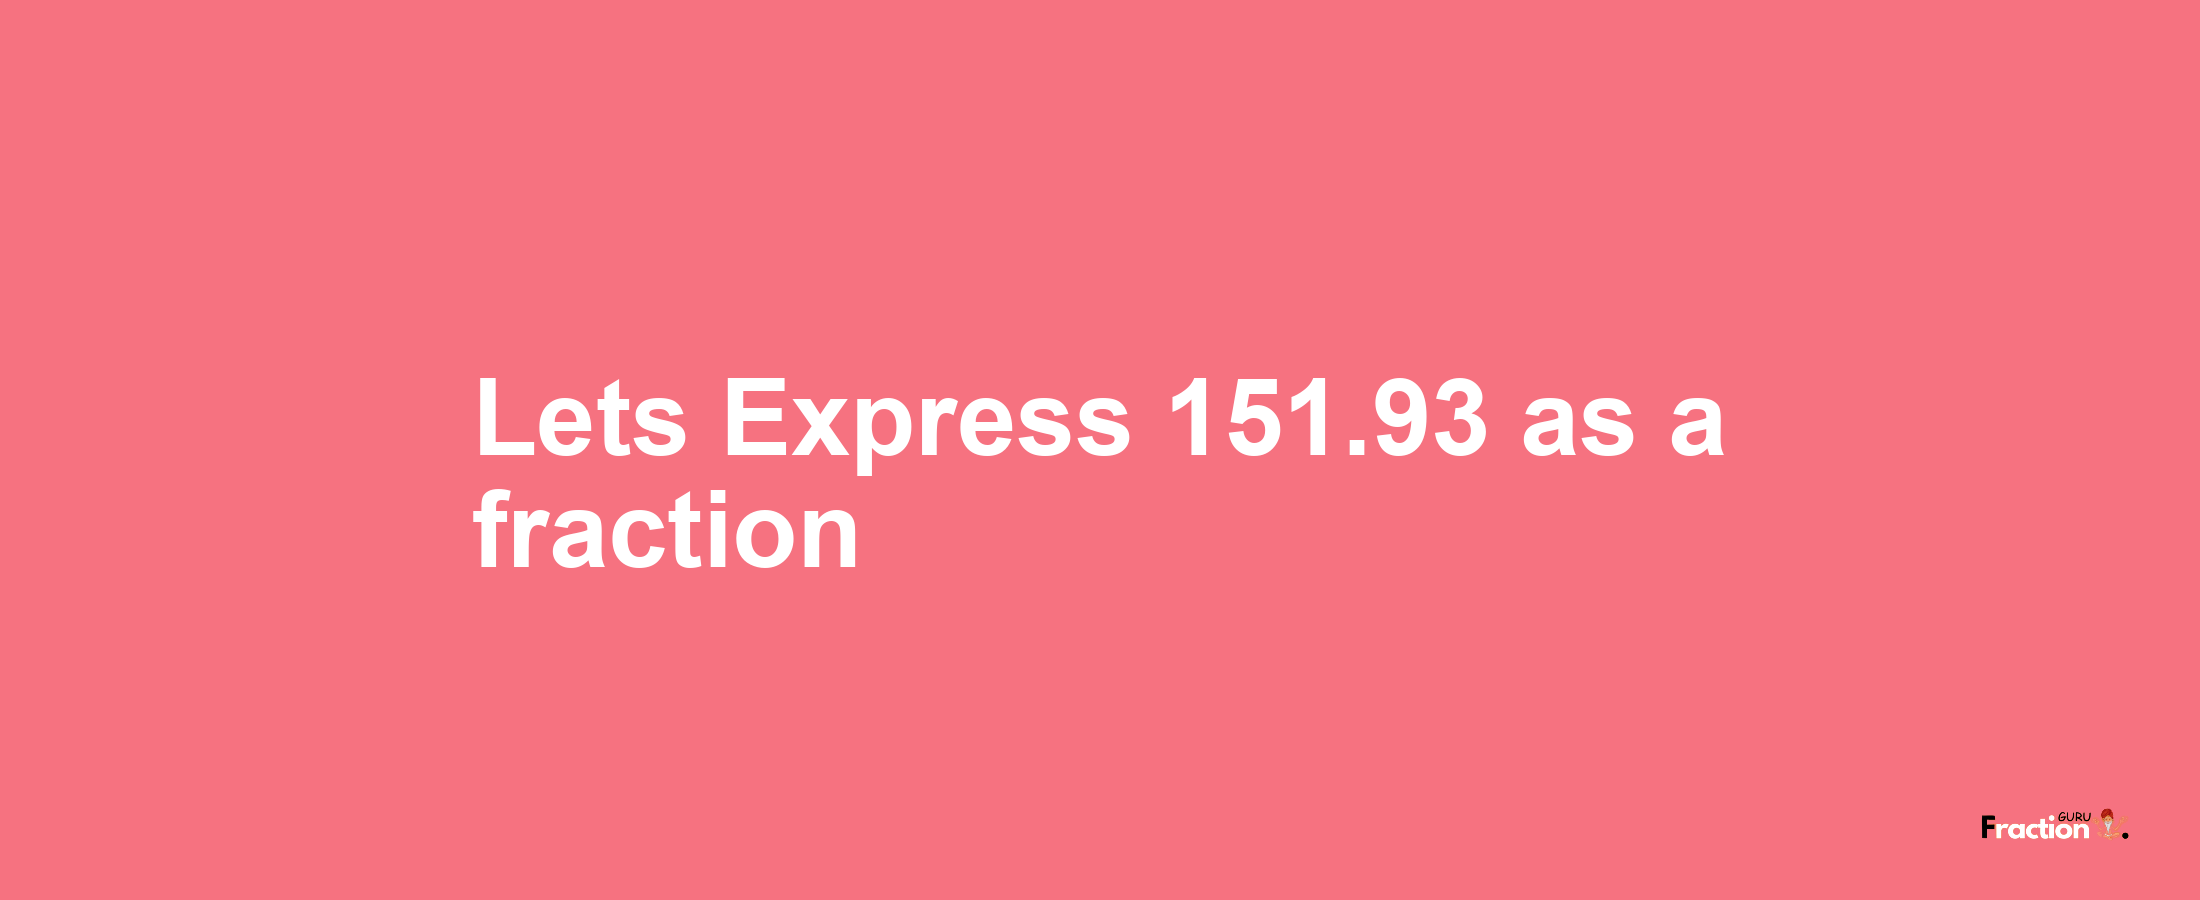 Lets Express 151.93 as afraction